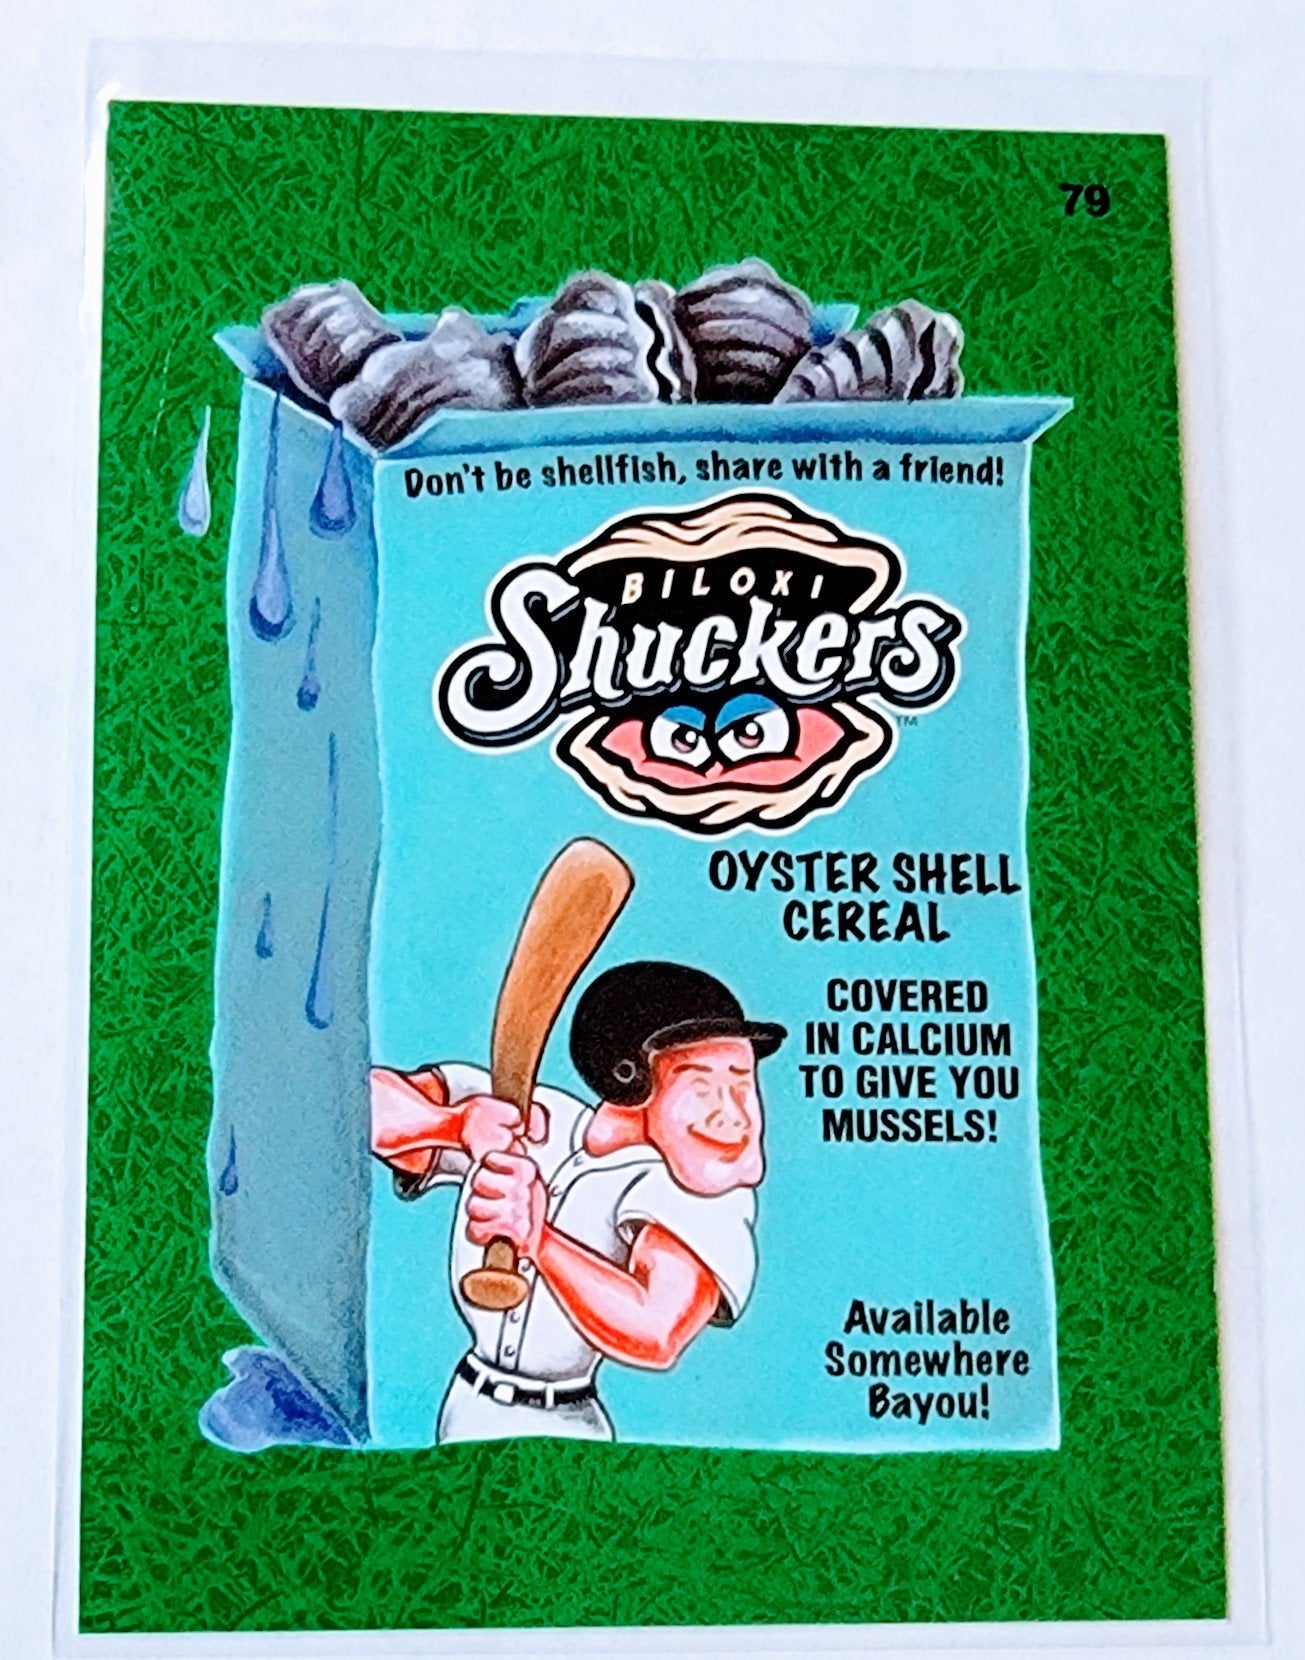 2016 Topps MLB Baseball Wacky Packages Boloxi Shuckers Oyster Shell Cereal Green Grass Parallel Sticker Trading Card MCSC1 simple Xclusive Collectibles   